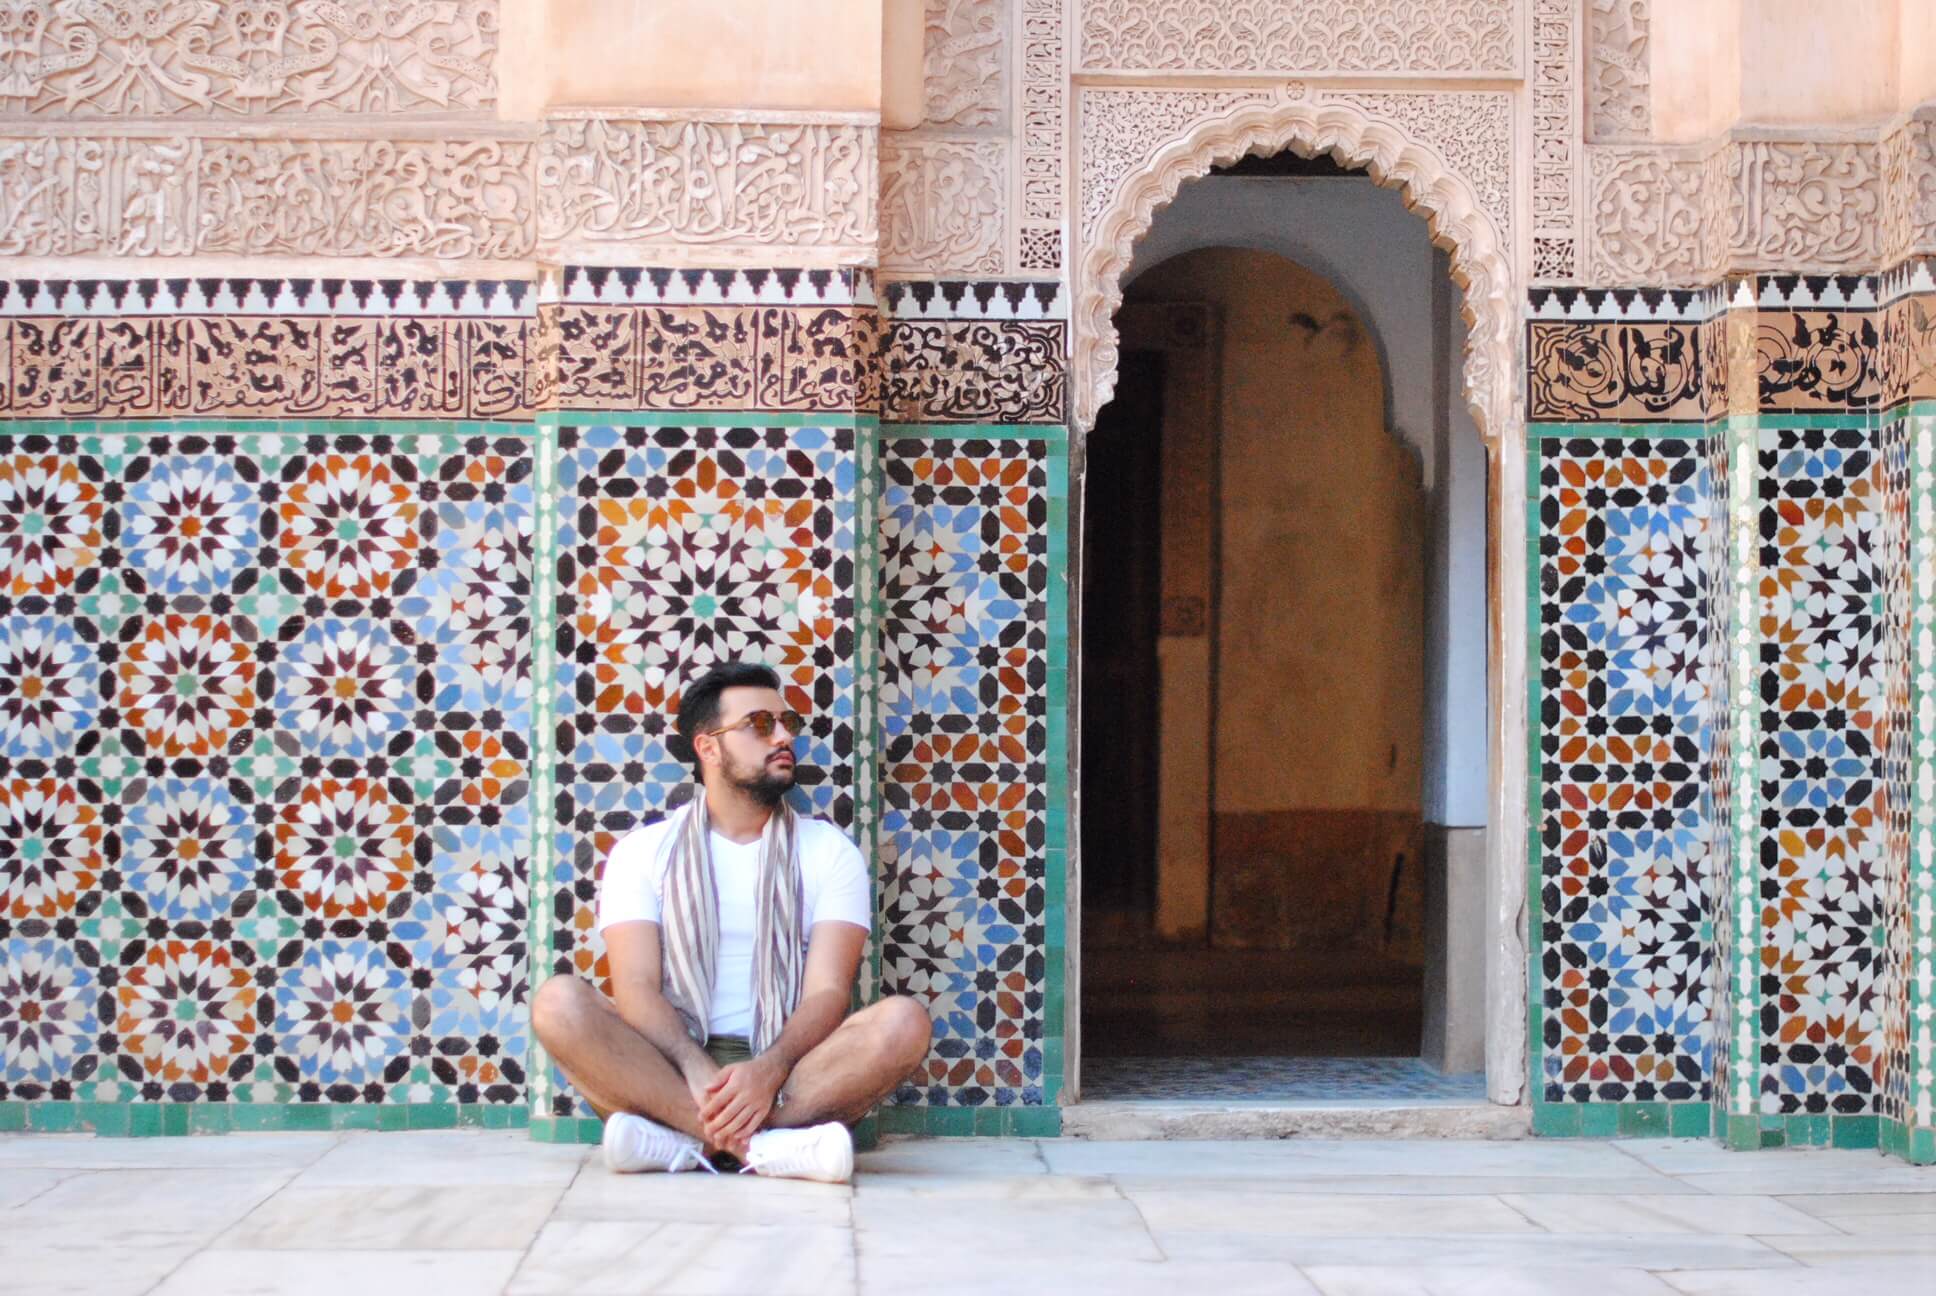 From Medinas to Palaces: Exploring the Imperial Cities of Morocco